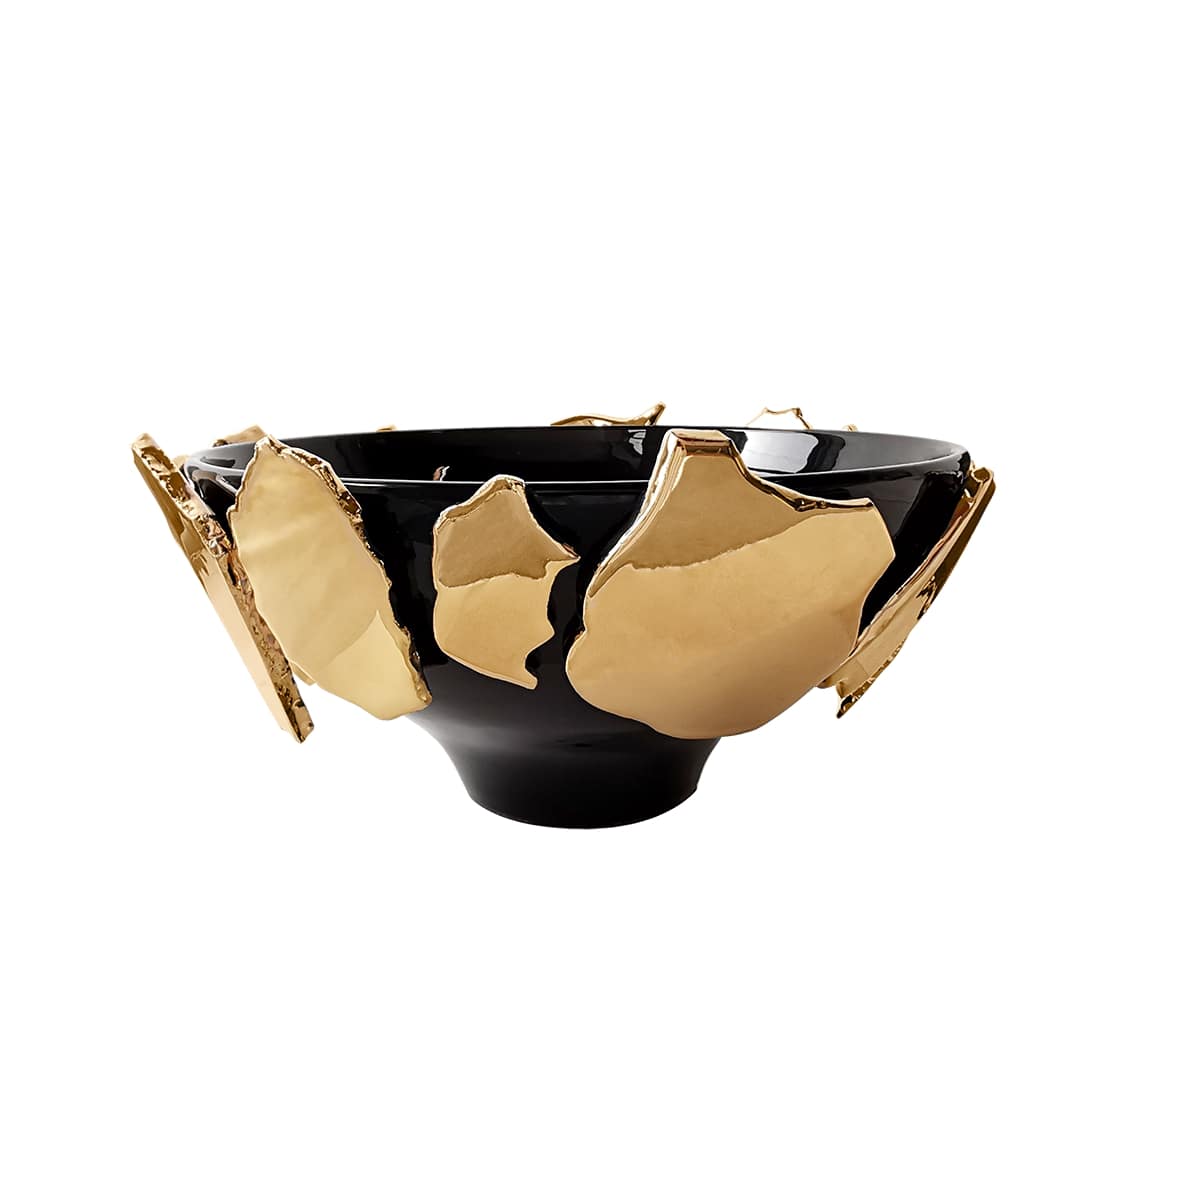 ach collection home accessories nagy bowl 2